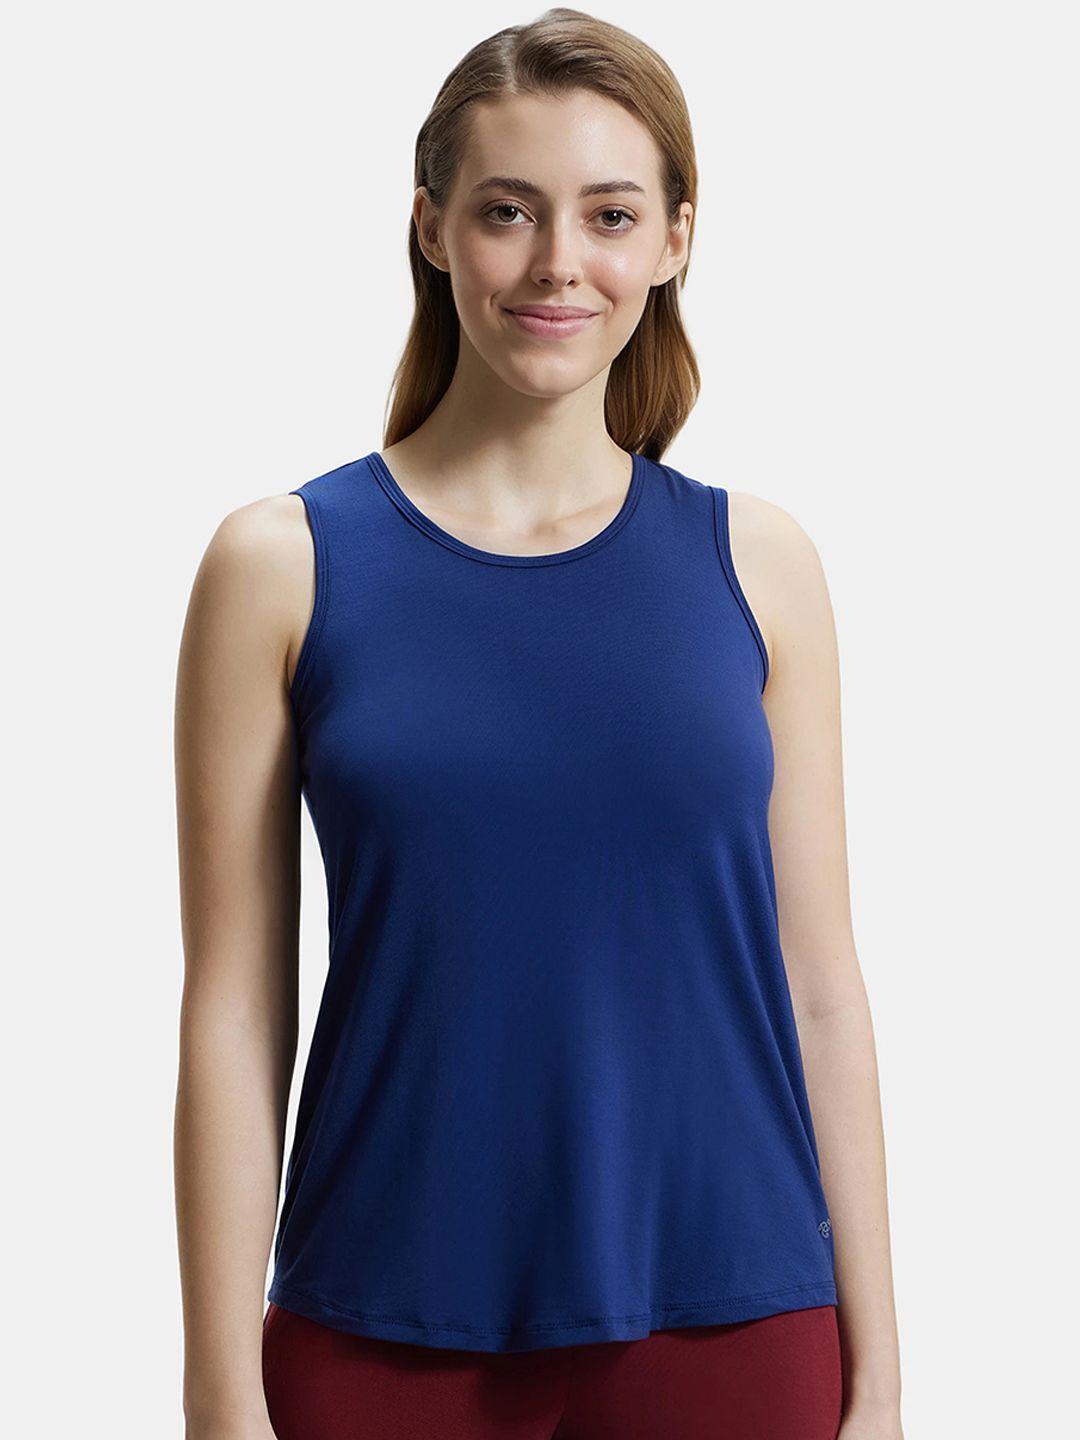 jockey round neck relaxed fit sports tank top